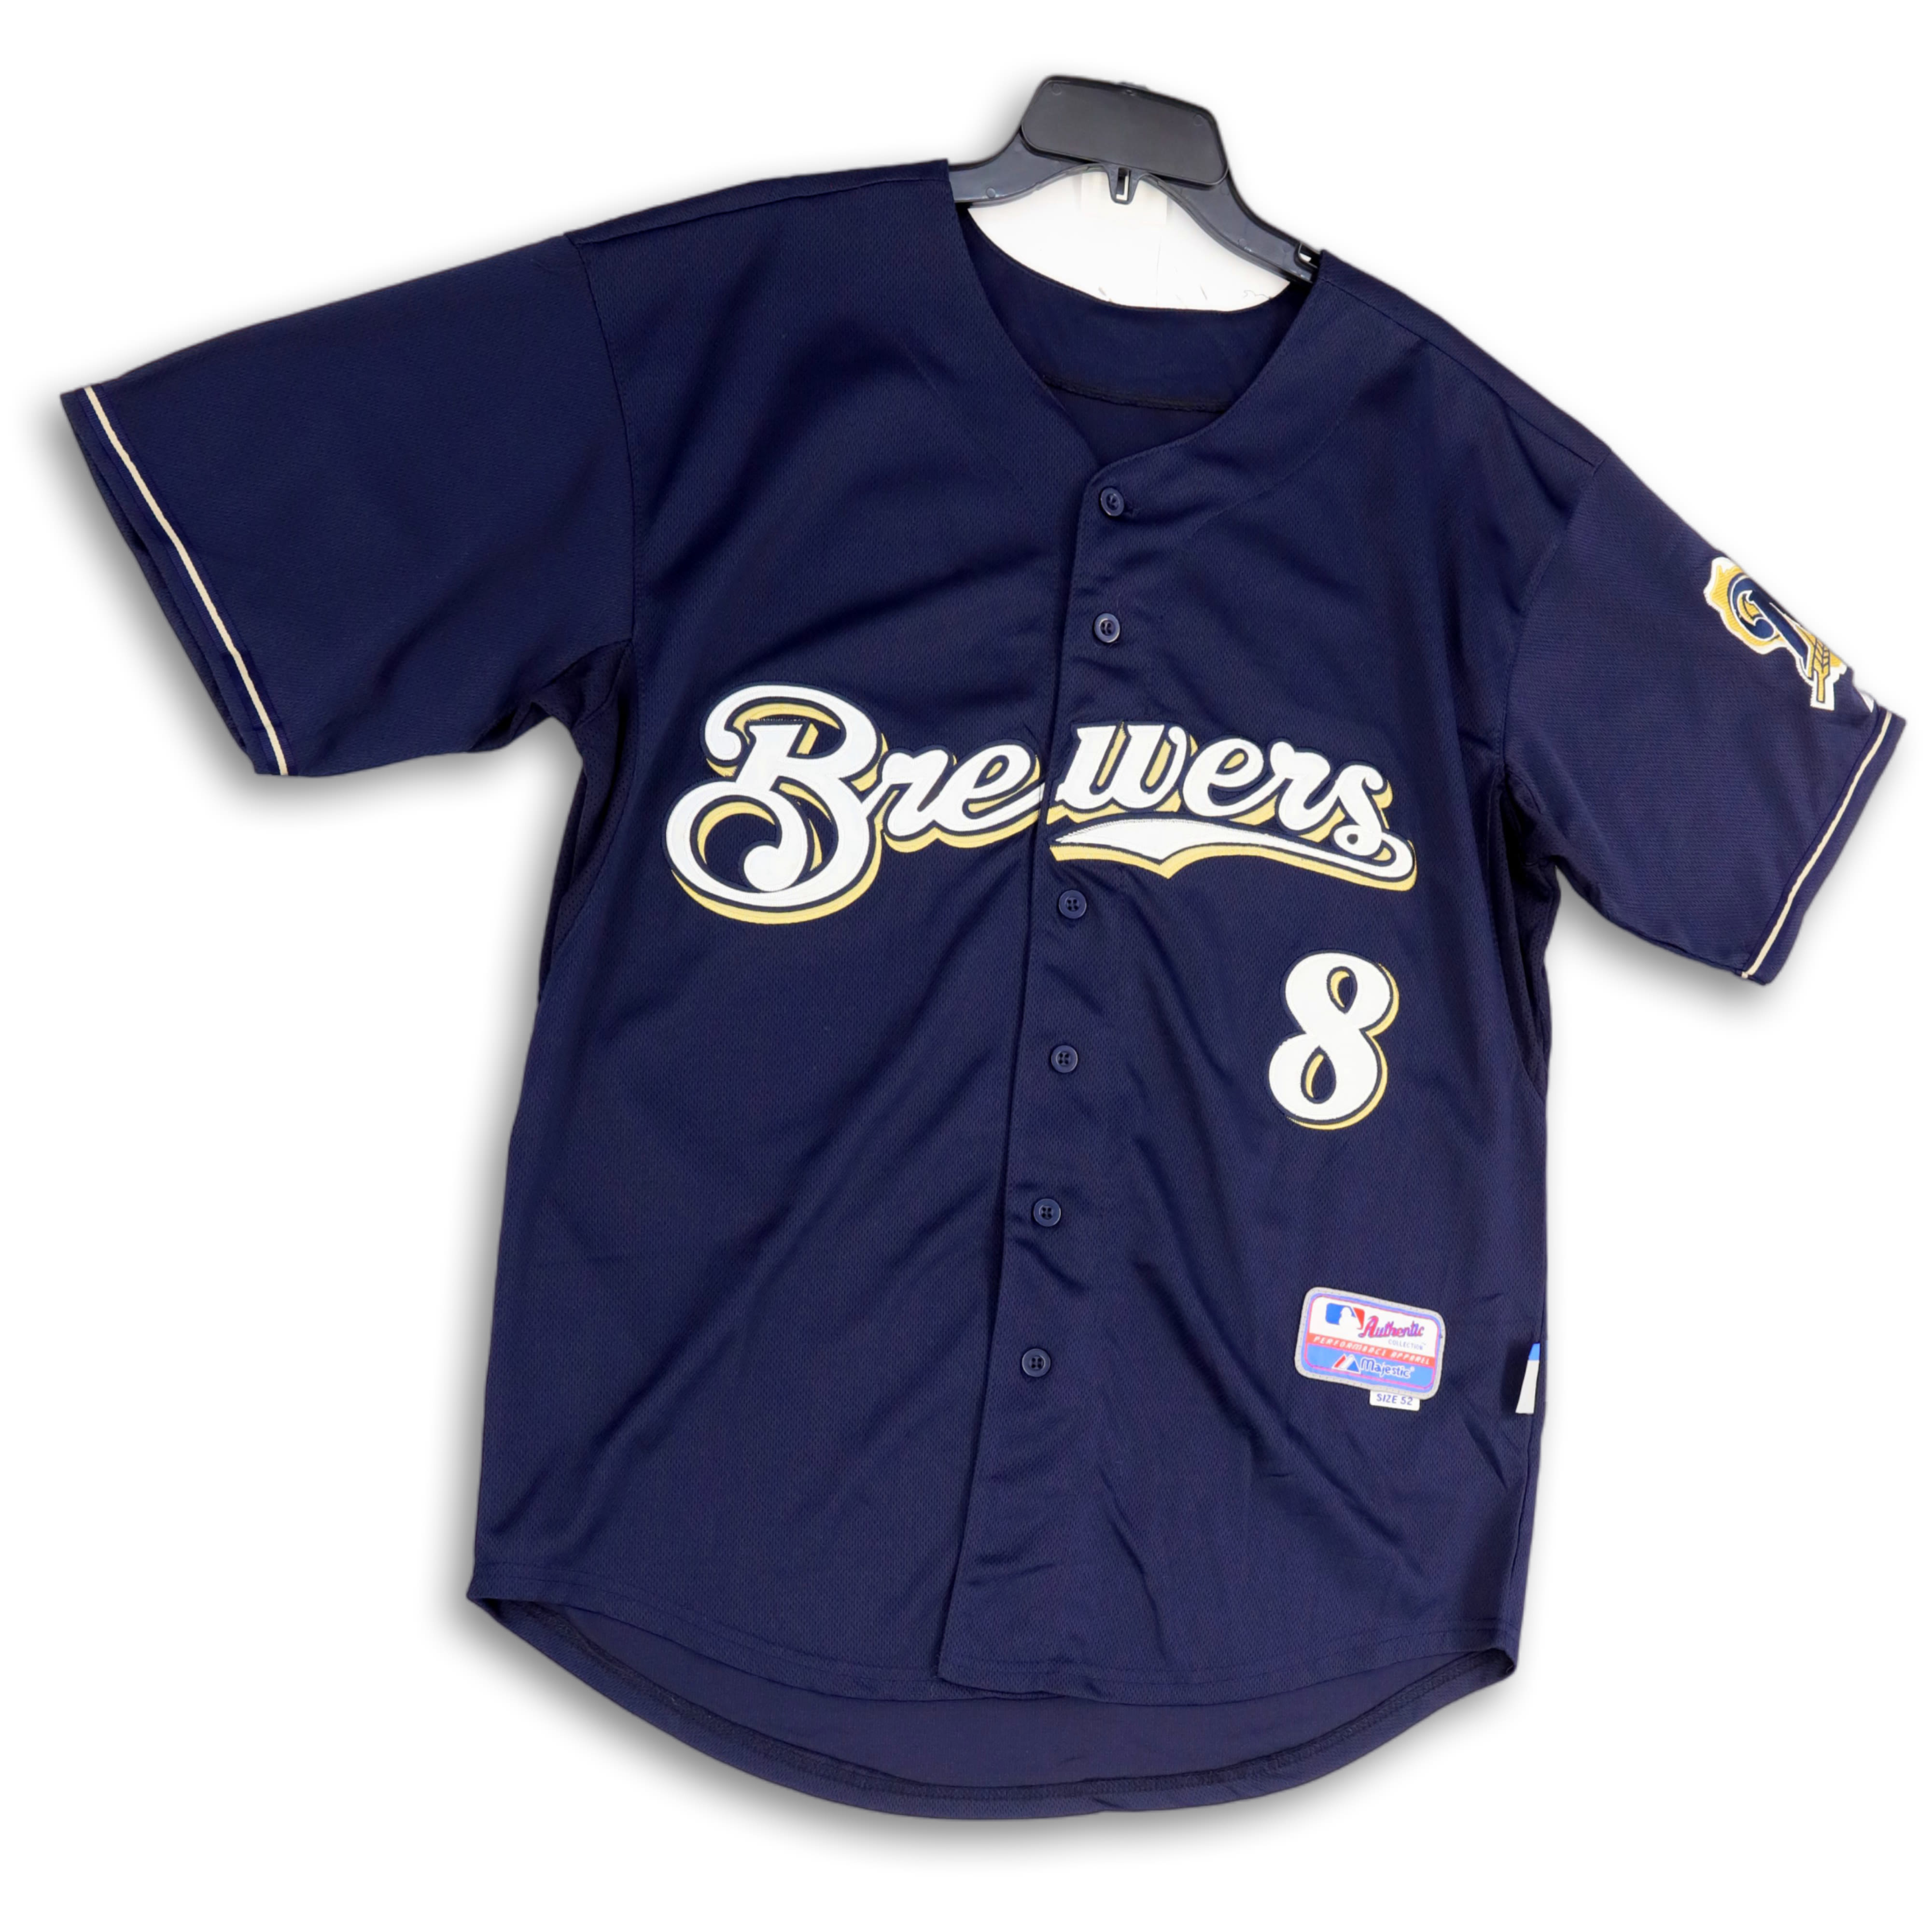 Ryan Braun Signed Authentic Milwaukee Brewers Jersey number 8 size Small